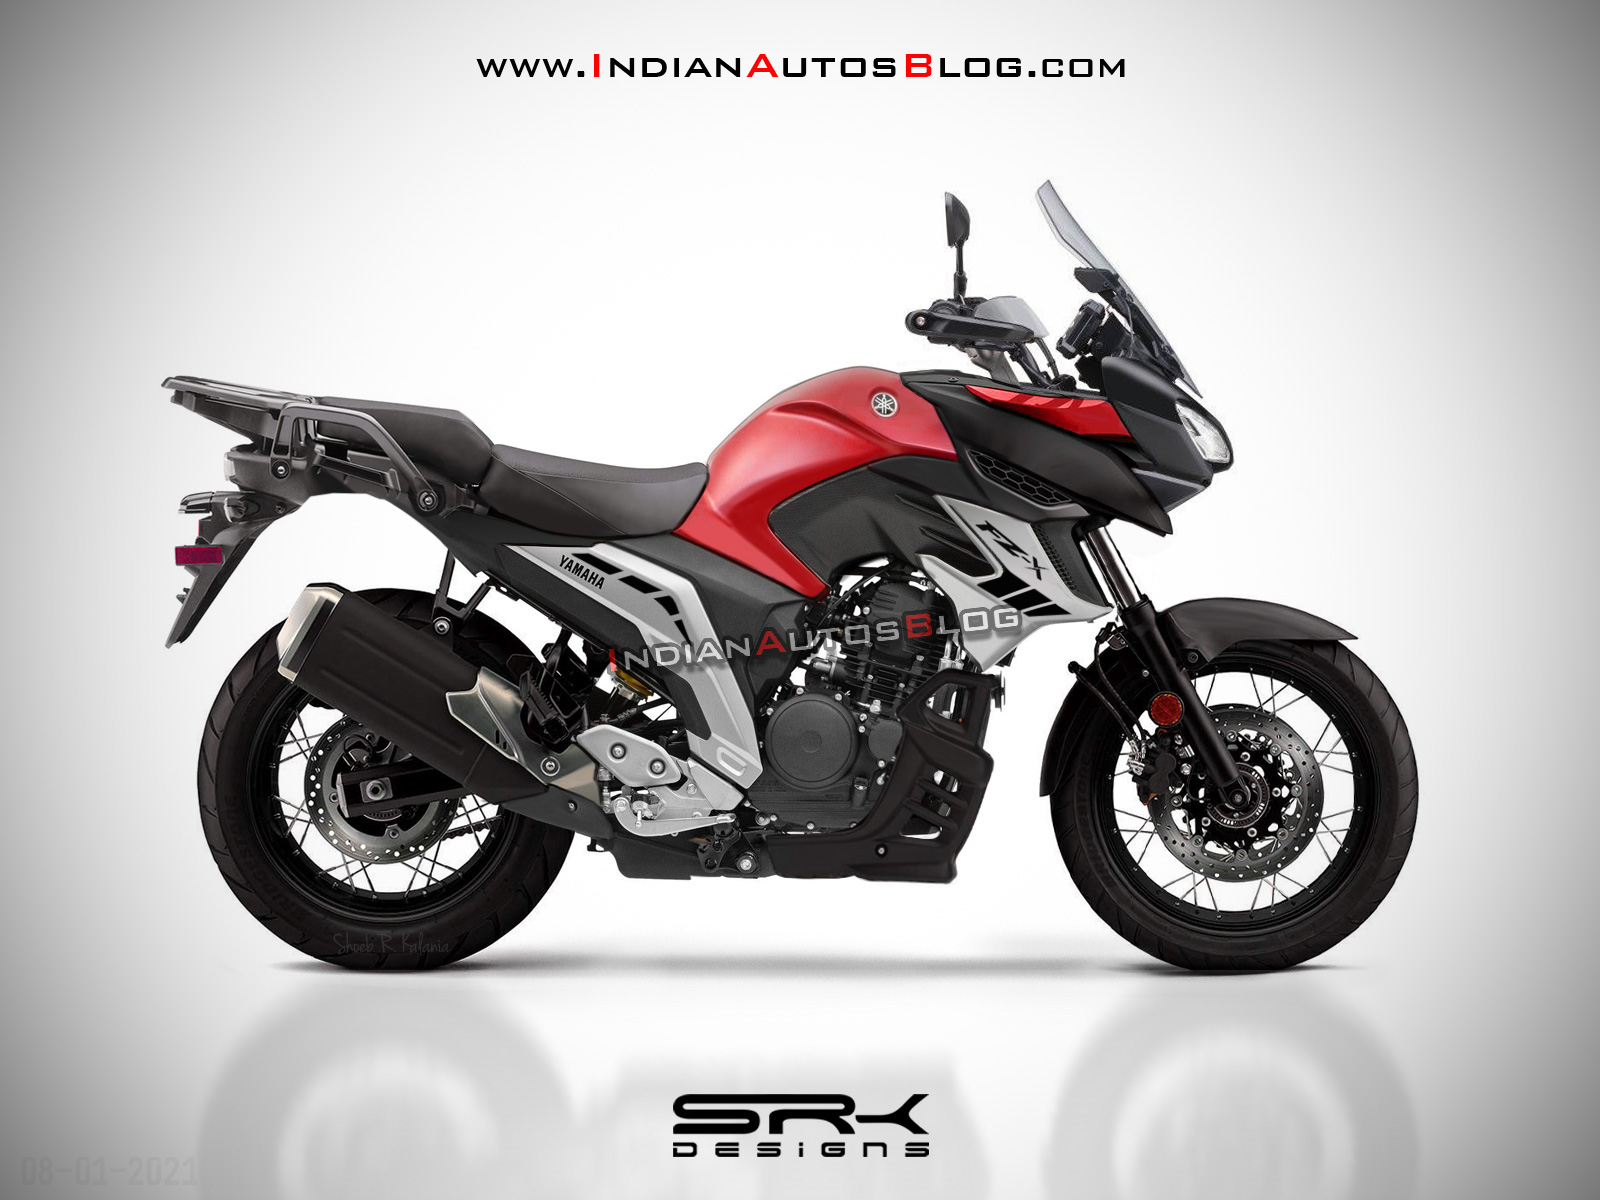 Yamaha FZ-X rendered - Here's how the alleged ADV tourer could look like